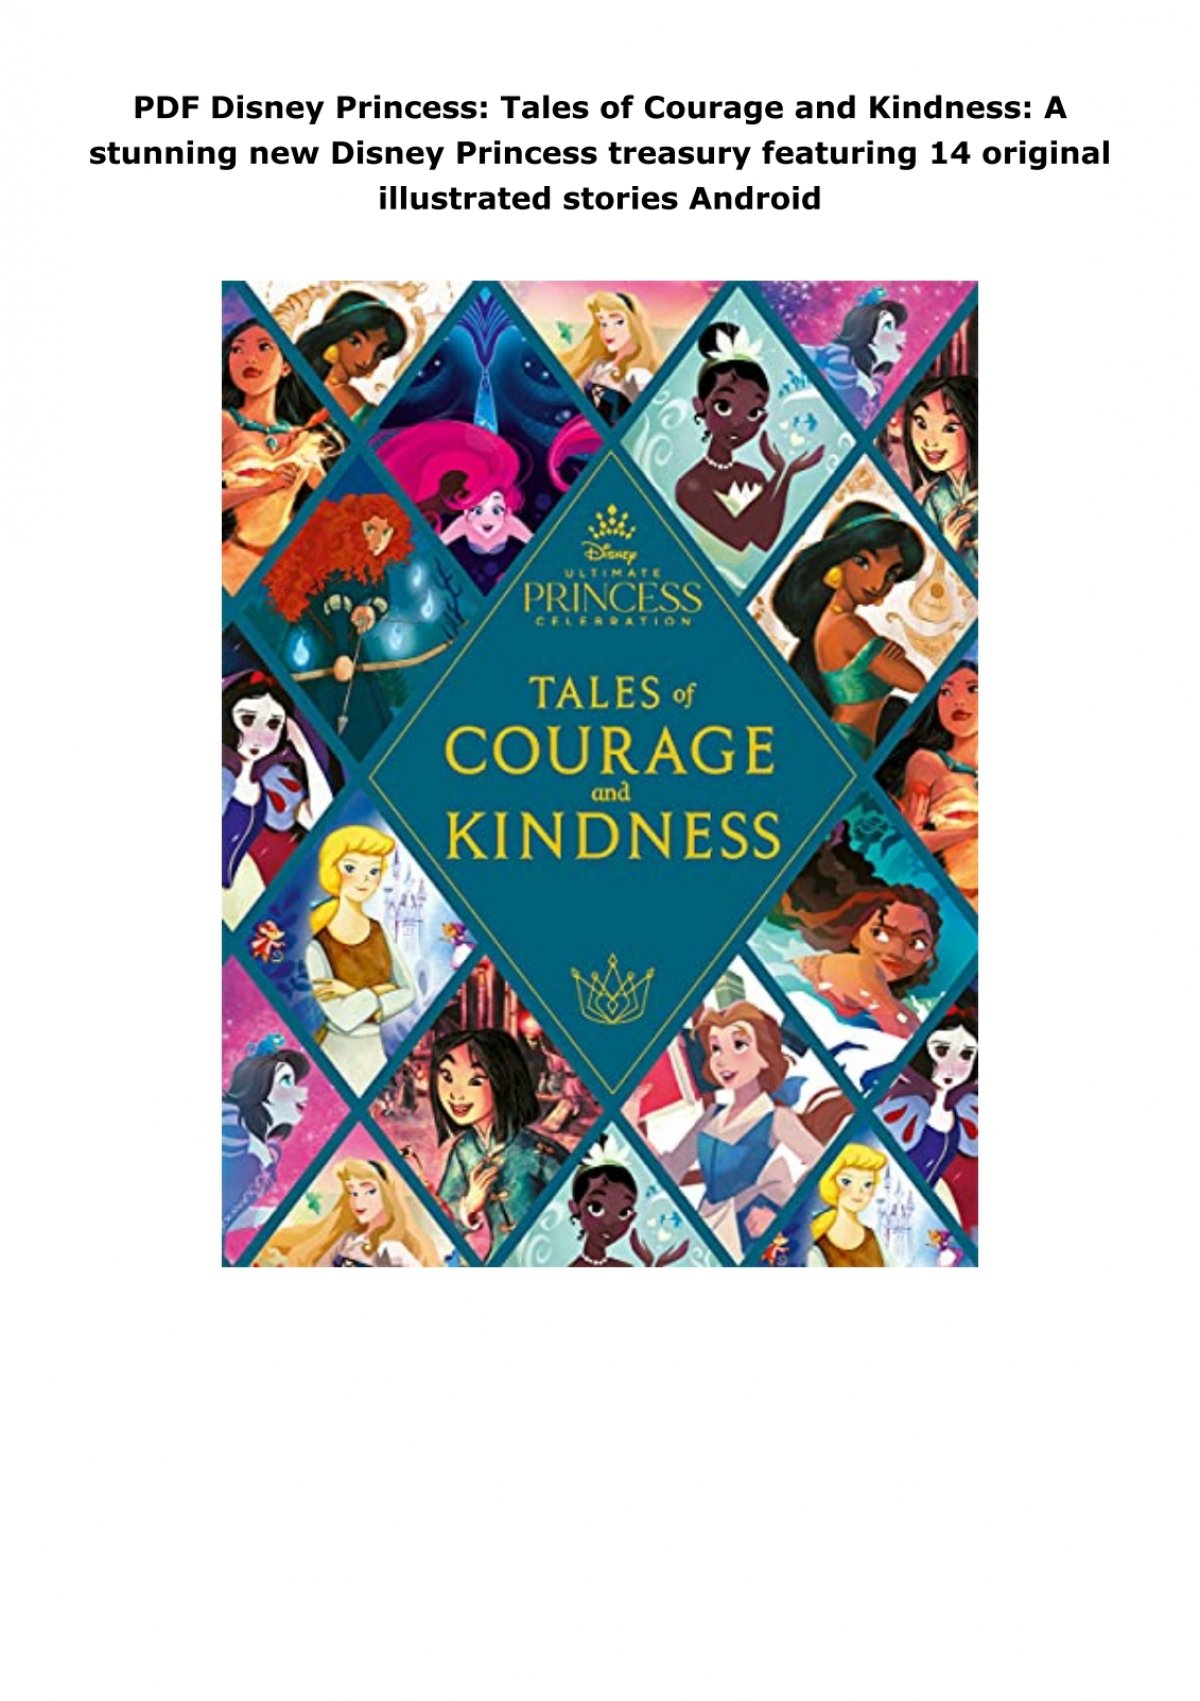 Disney Princess: Tales of Courage and Kindness: A stunning new Disney  Princess treasury featuring 14 original illustrated stories